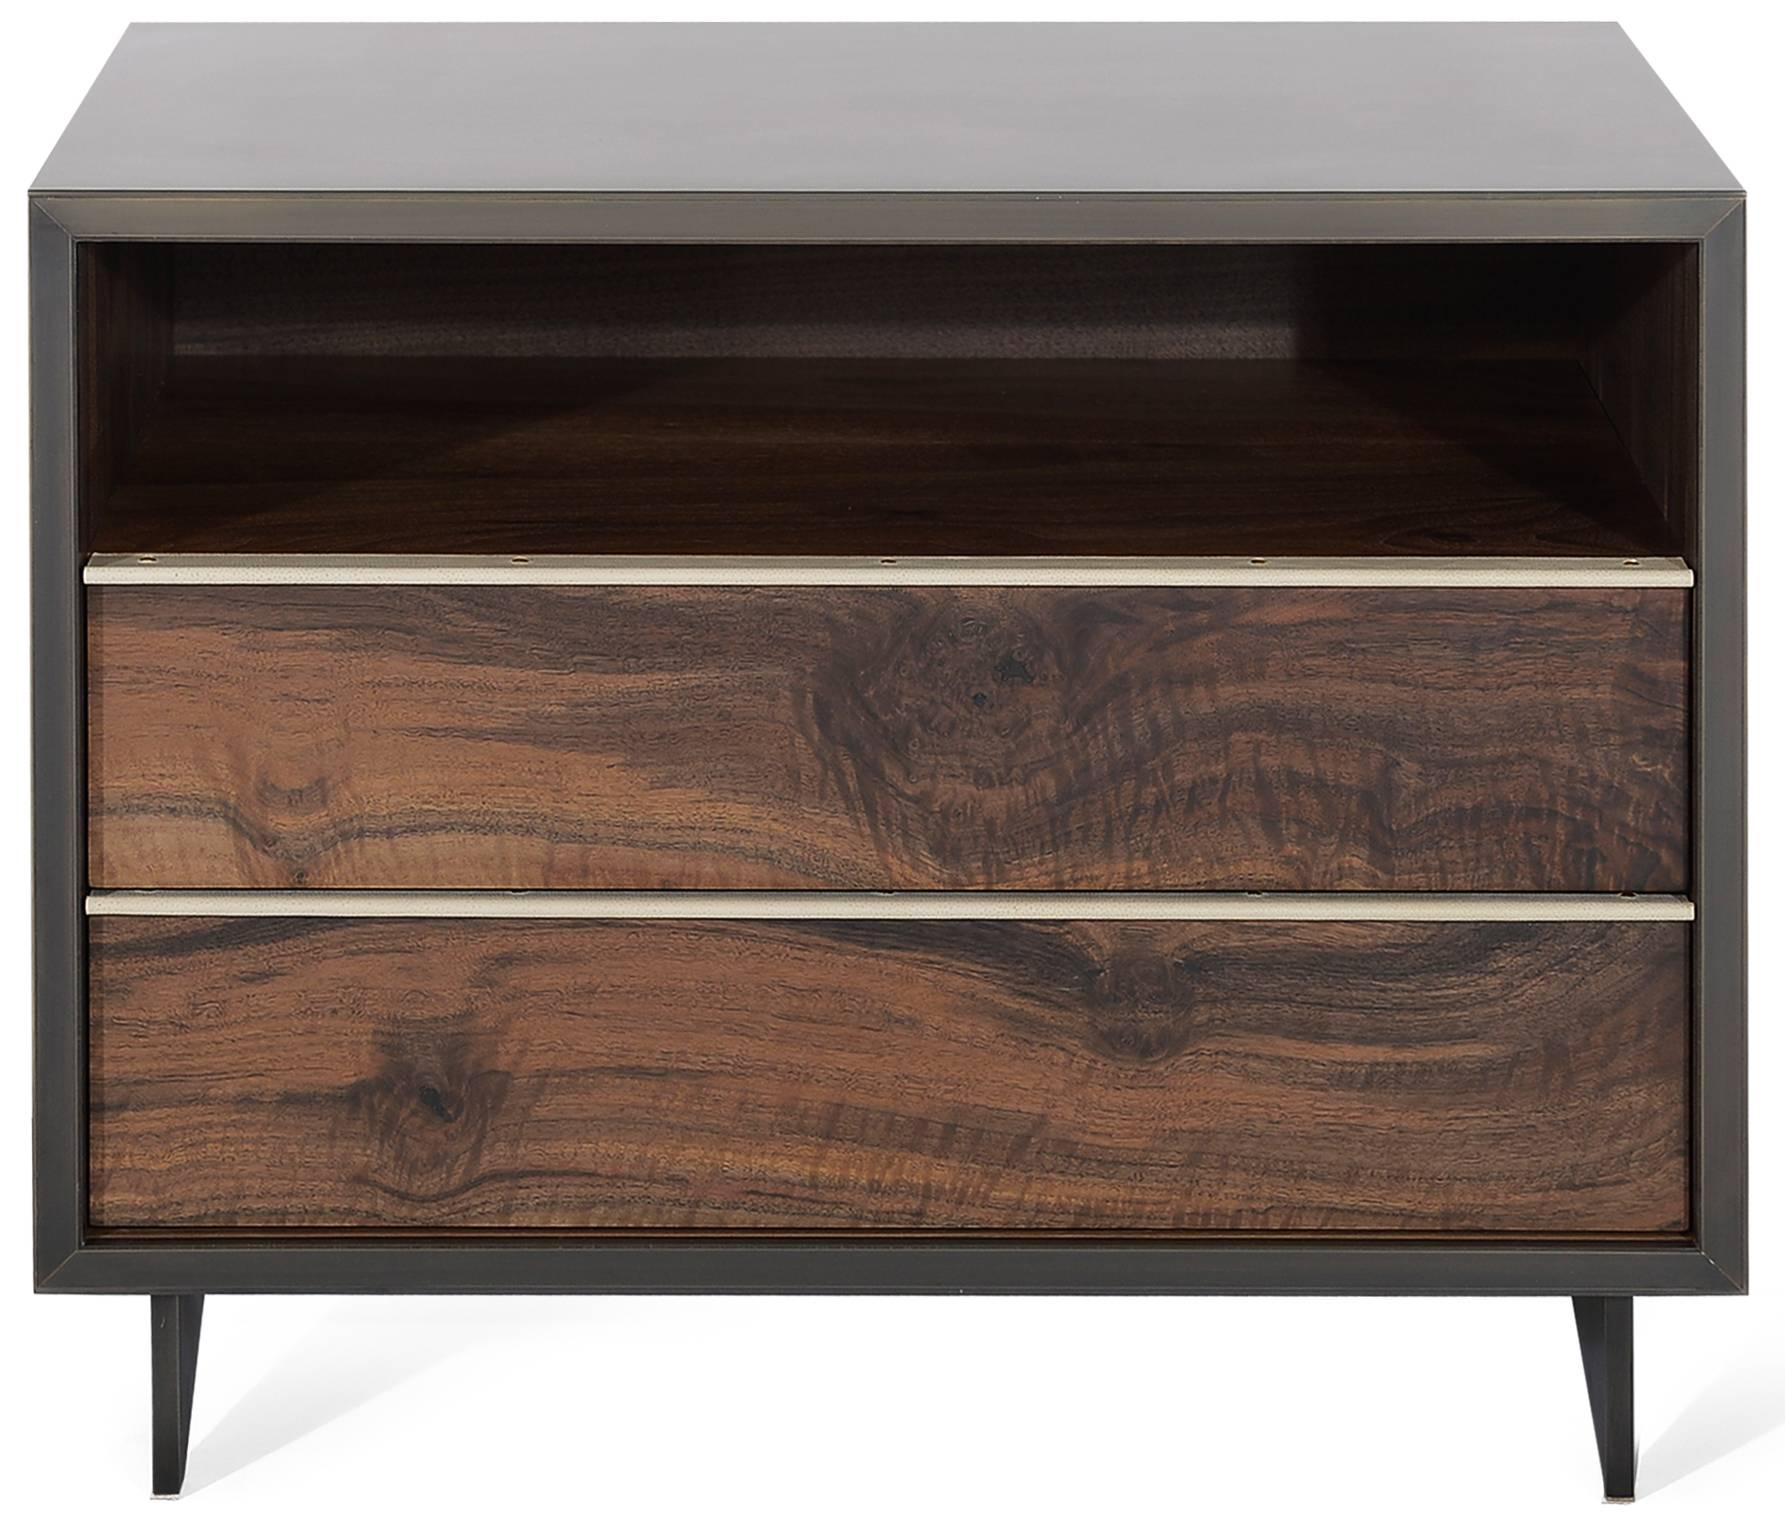 The elegant Tompkins end table has a darkened bronze encased in Epoxy Resin exterior with Claro walnut doors and interior and custom stingray leather pulls. The end table sits atop a blackened cold rolled steel base. The unique metal encased in